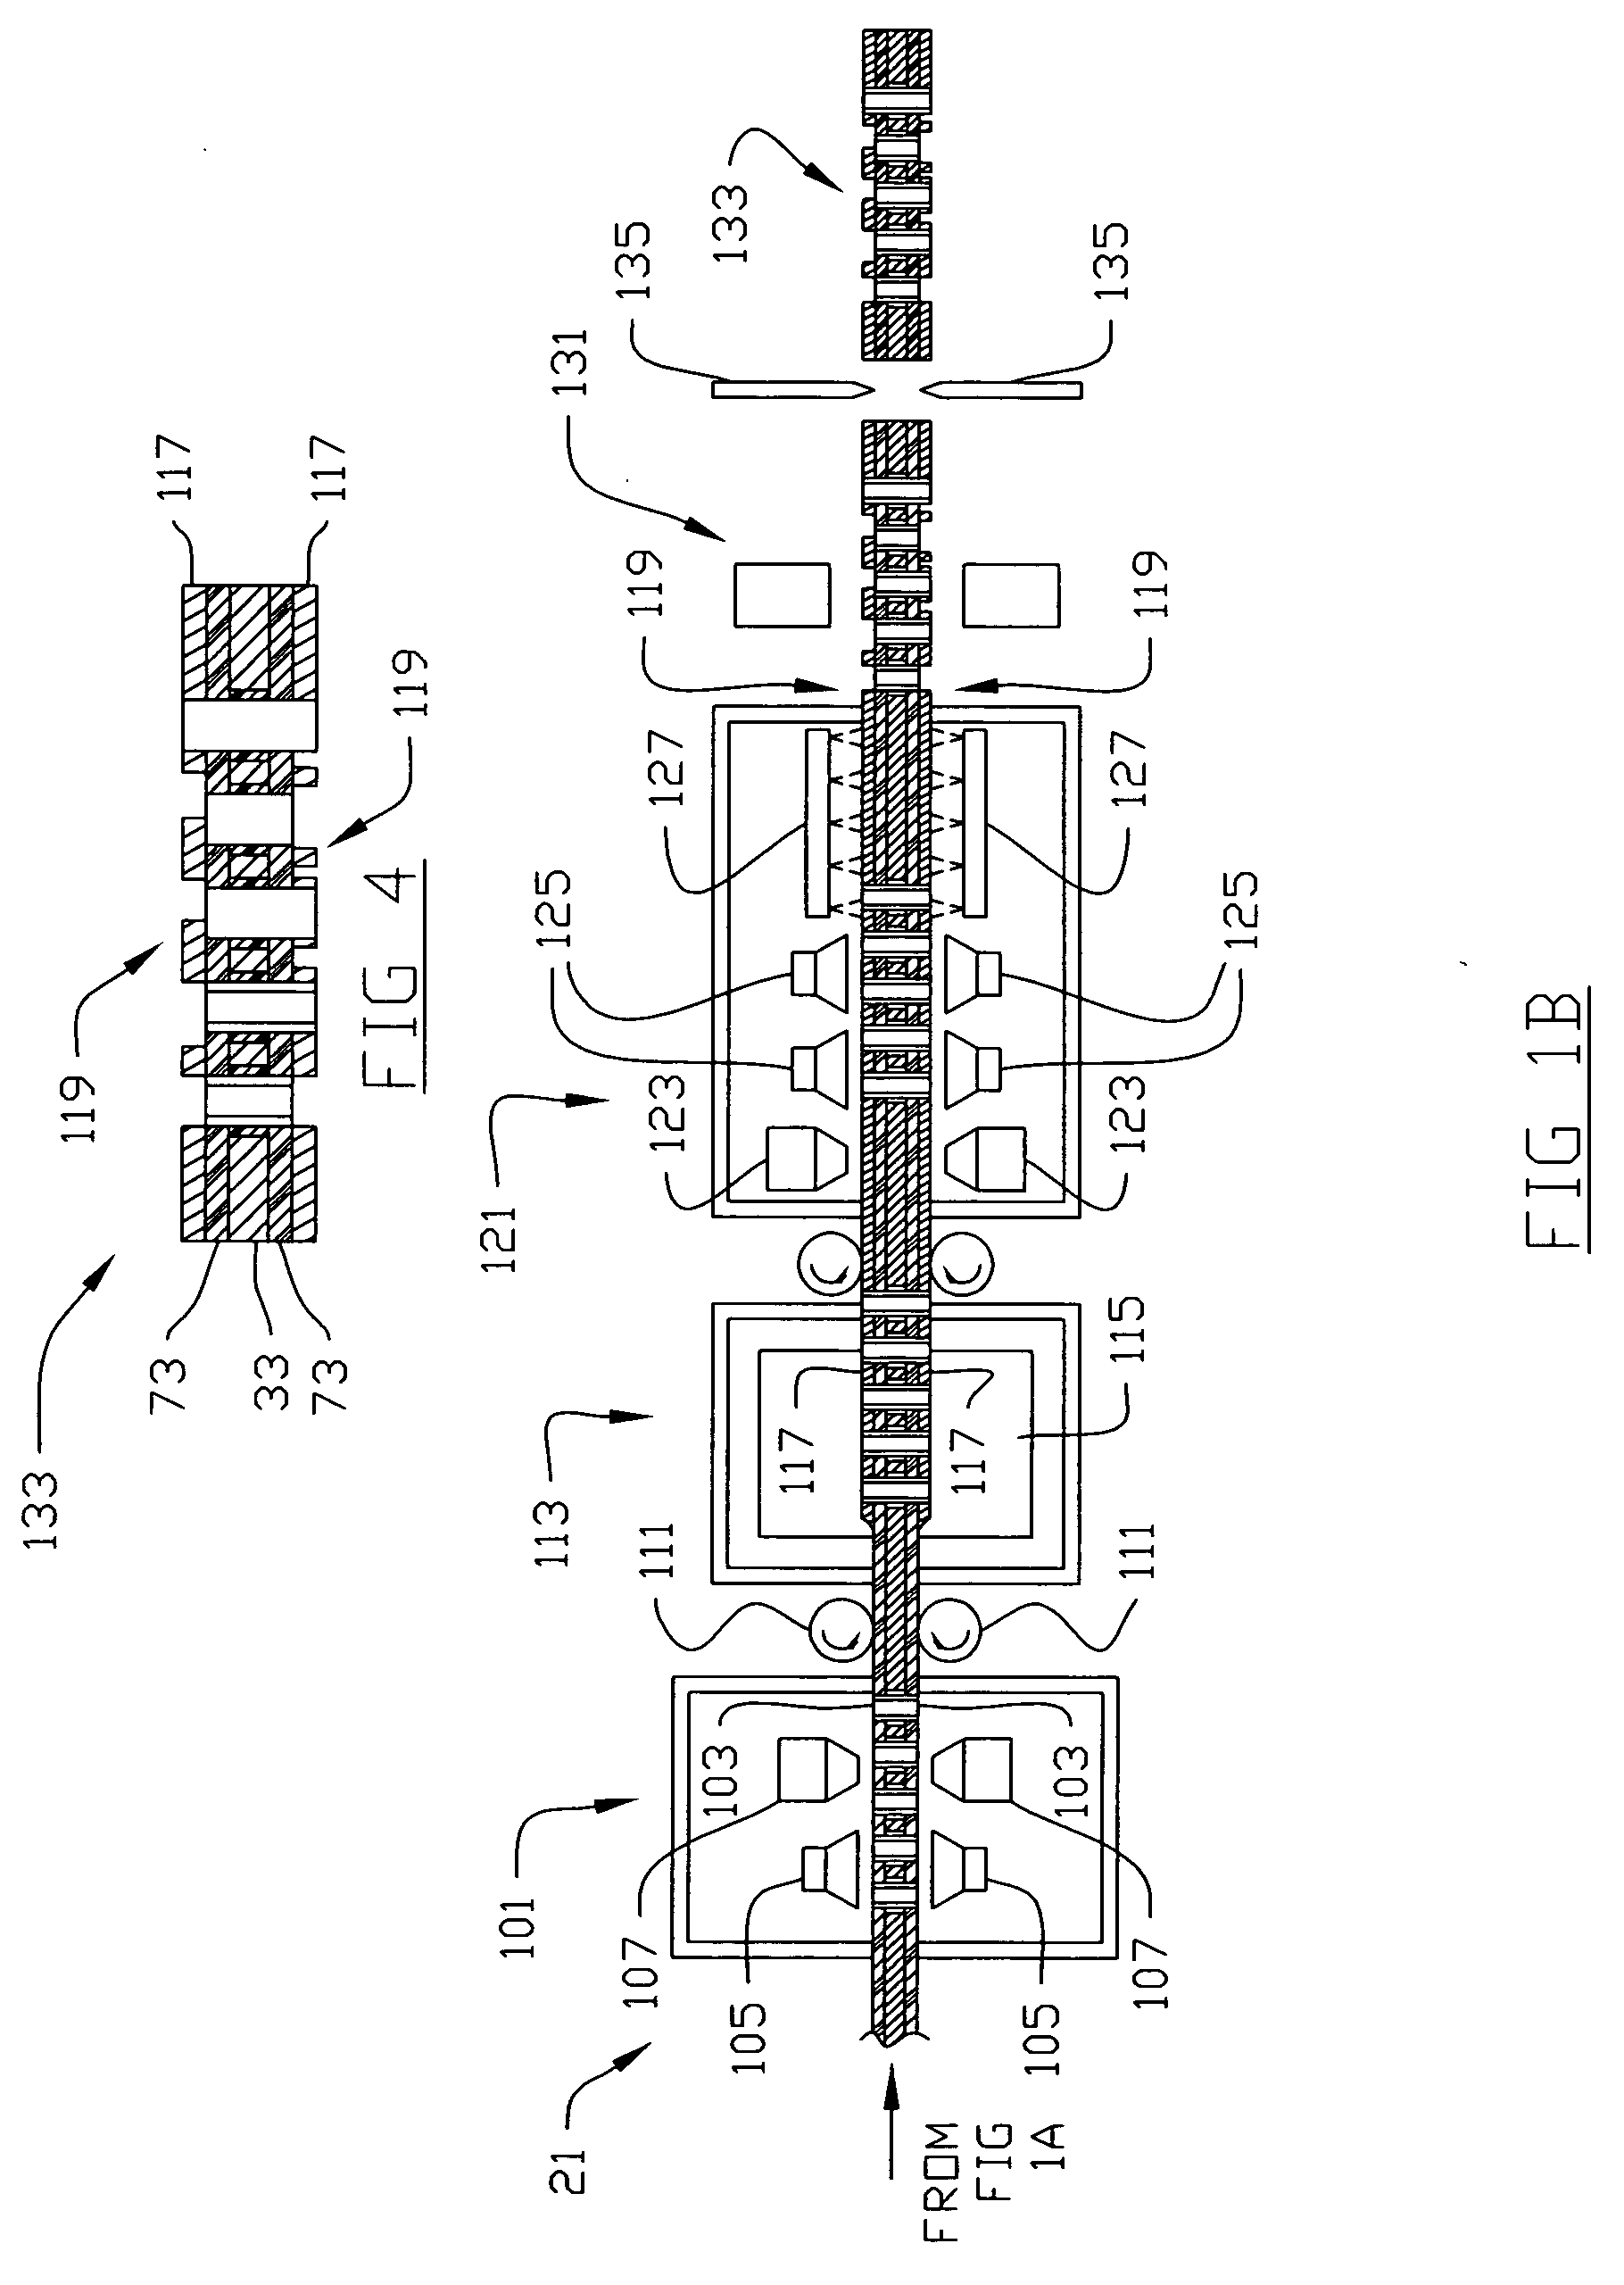 Apparatus and method for making circuitized substrates having photo-imageable dielectric layers in a continuous manner